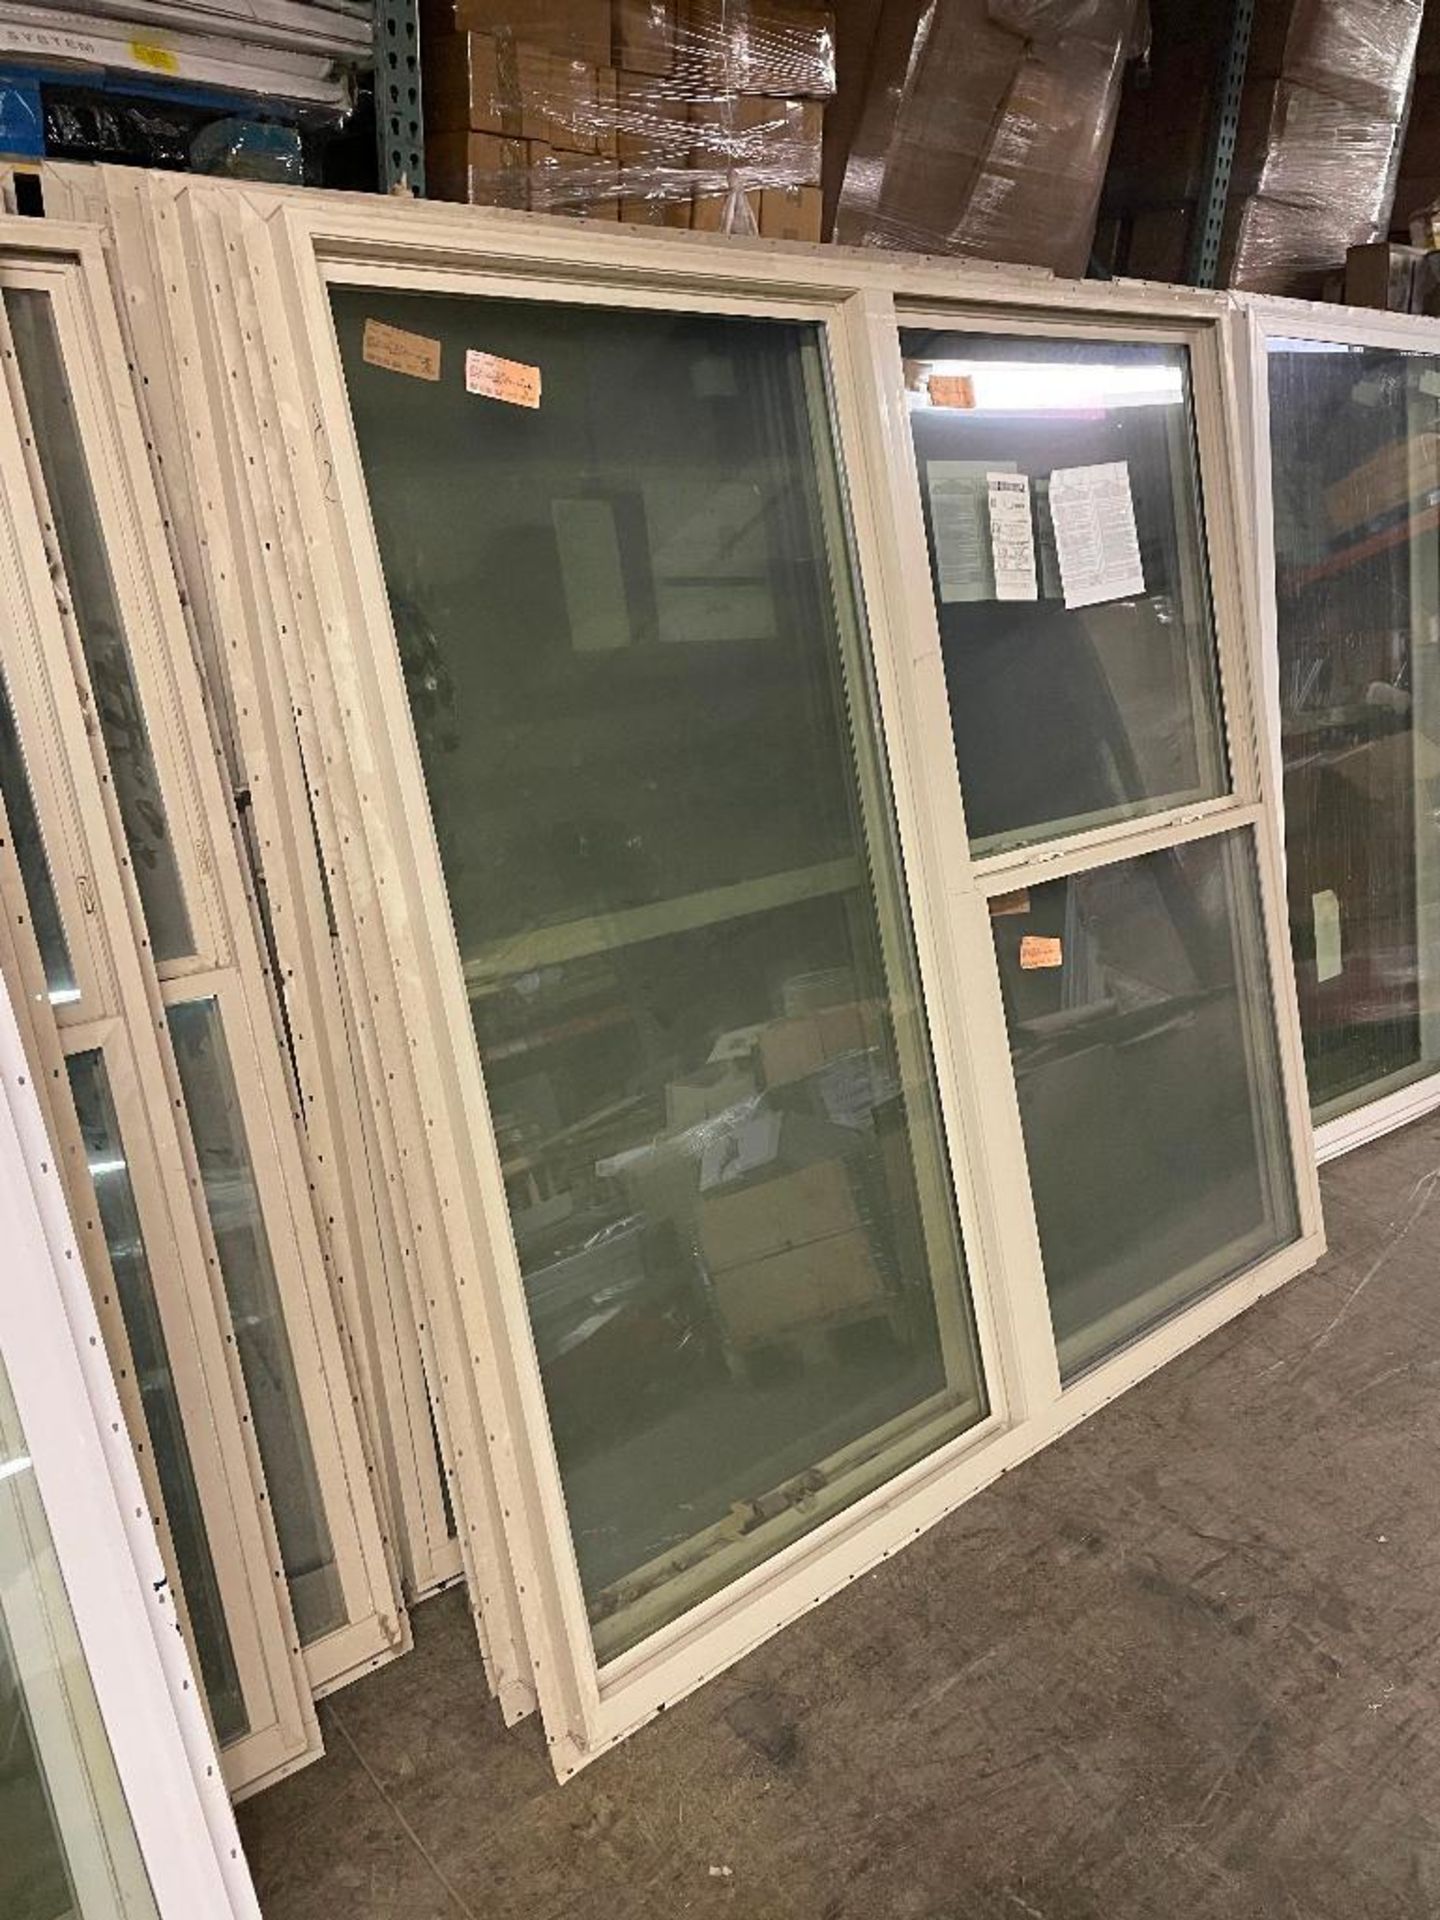 6 FT. / 3 PANEL TEMPERED GLASS WINDOW - Image 2 of 4